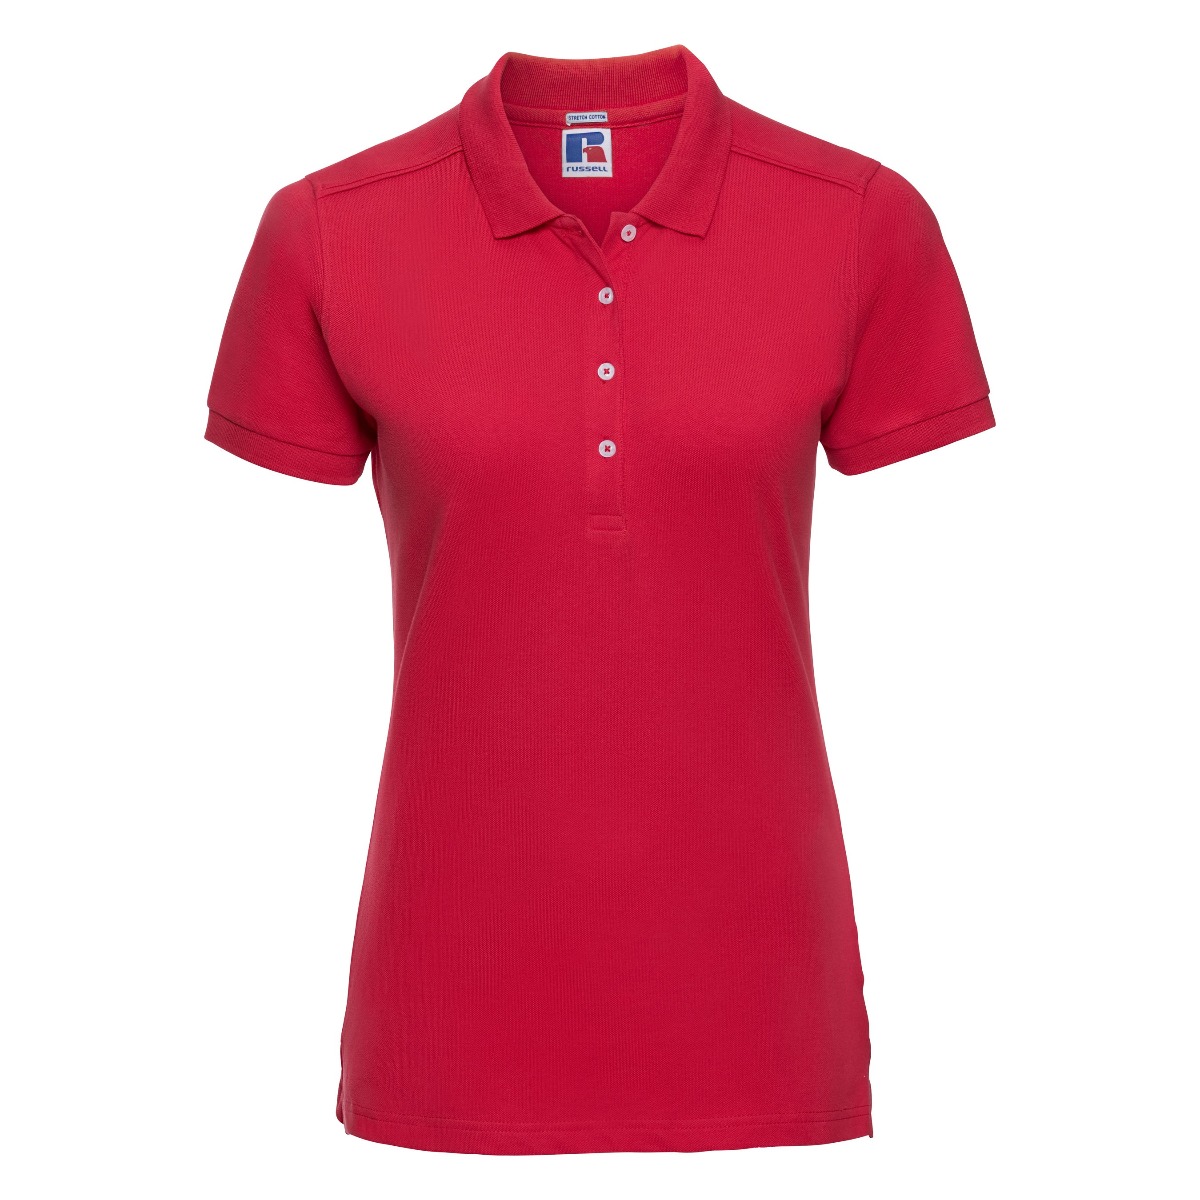 ax-httpswebsystems.s3.amazonaws.comtmp_for_downloadrussell-womens-stretch-classic-red_2.jpg